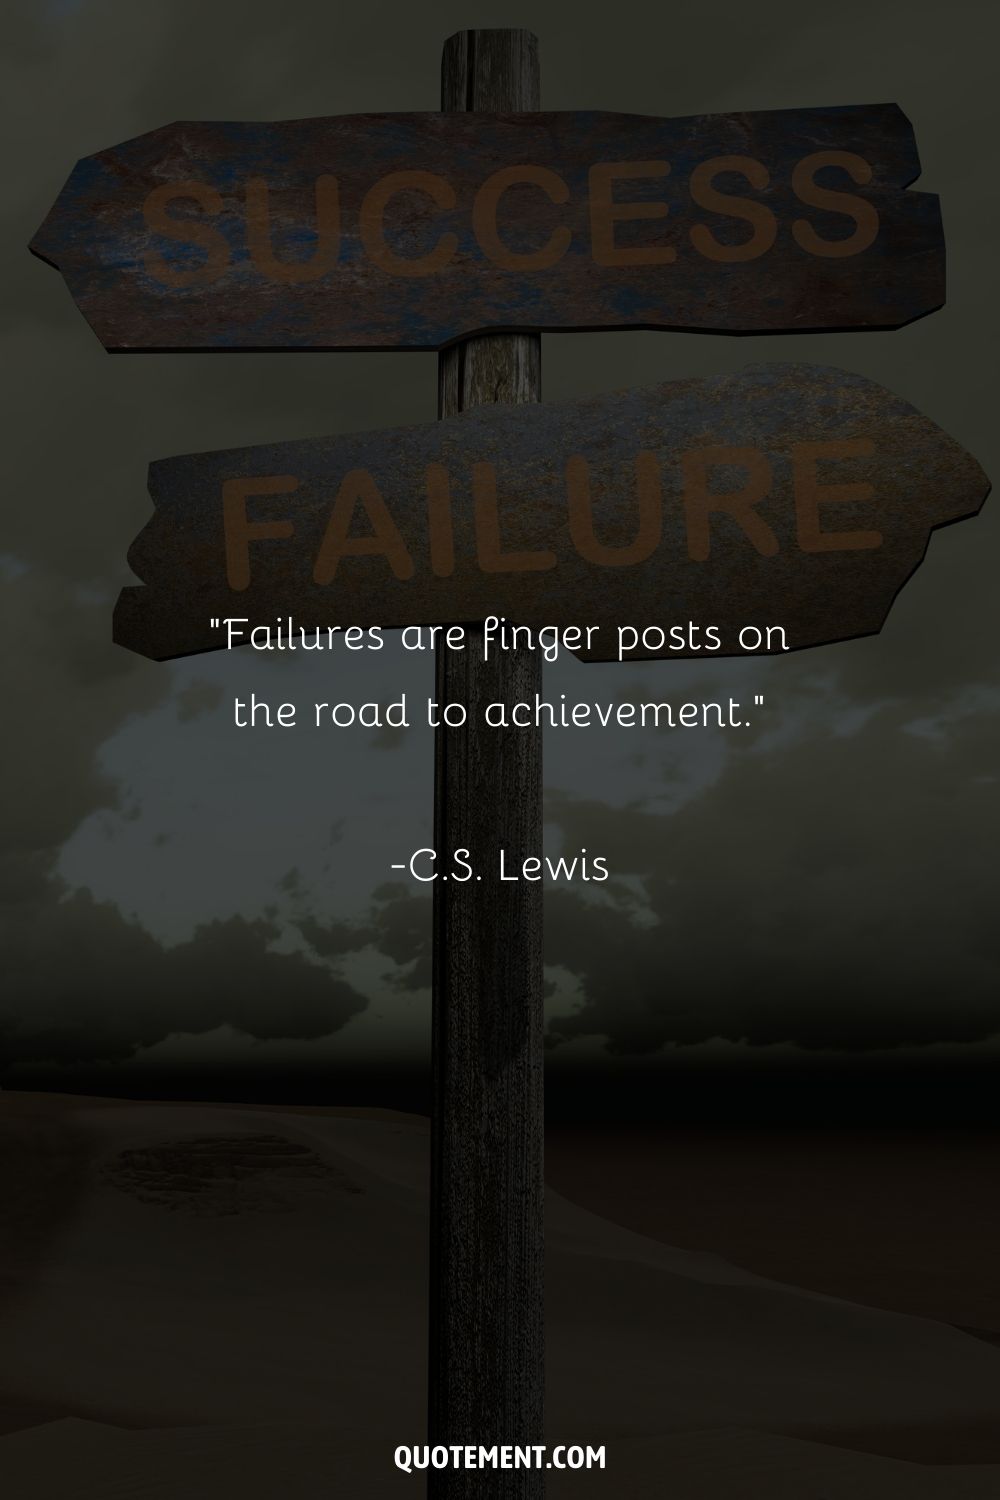 “Failures are finger posts on the road to achievement.” ― C.S. Lewis